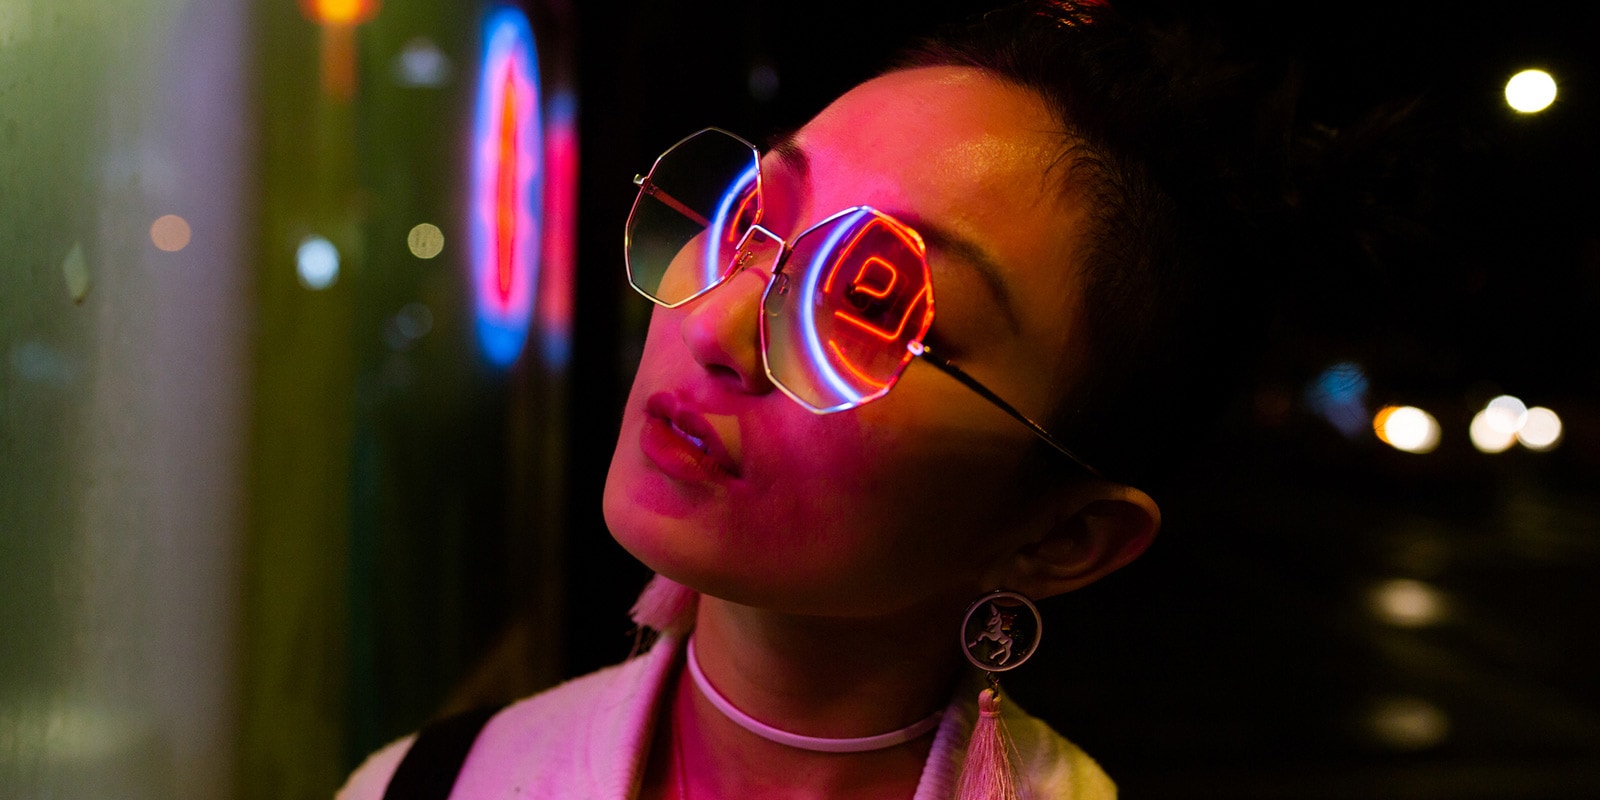 A close up of a woman wearing sunglasses with neon lights reflecting on her.